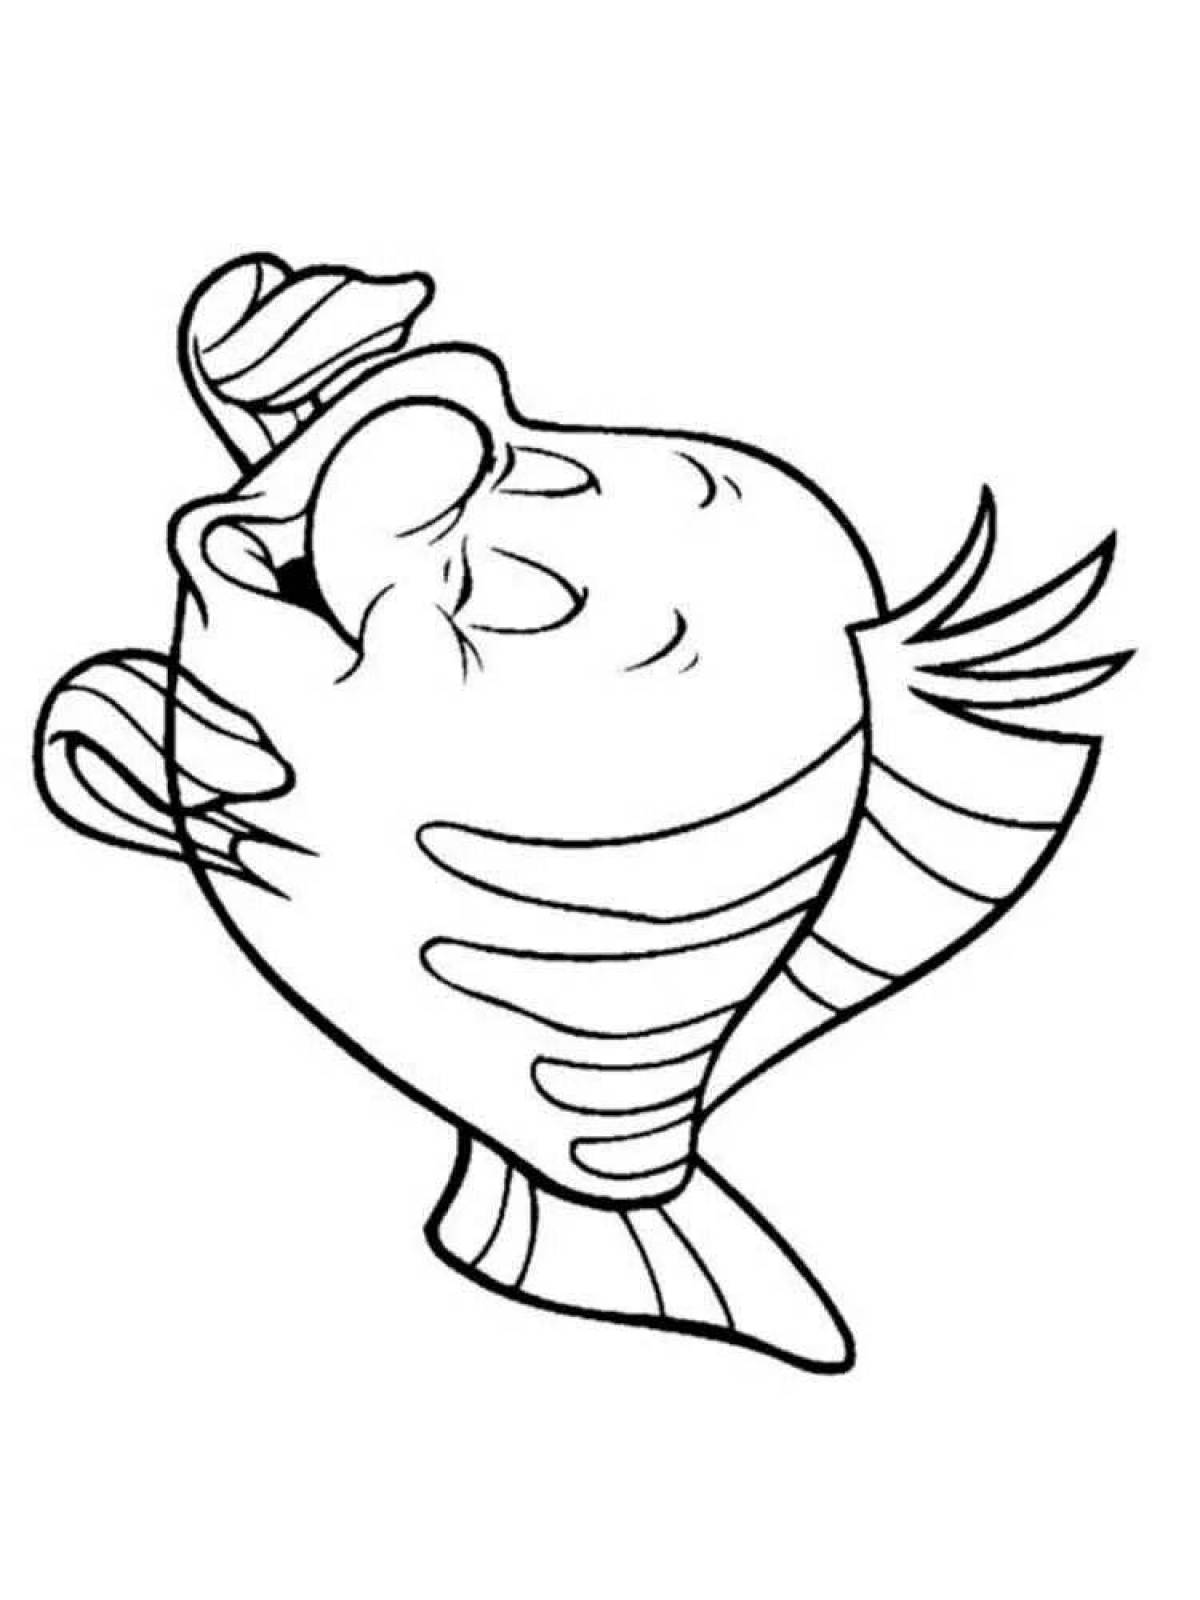 Coloring page festive float